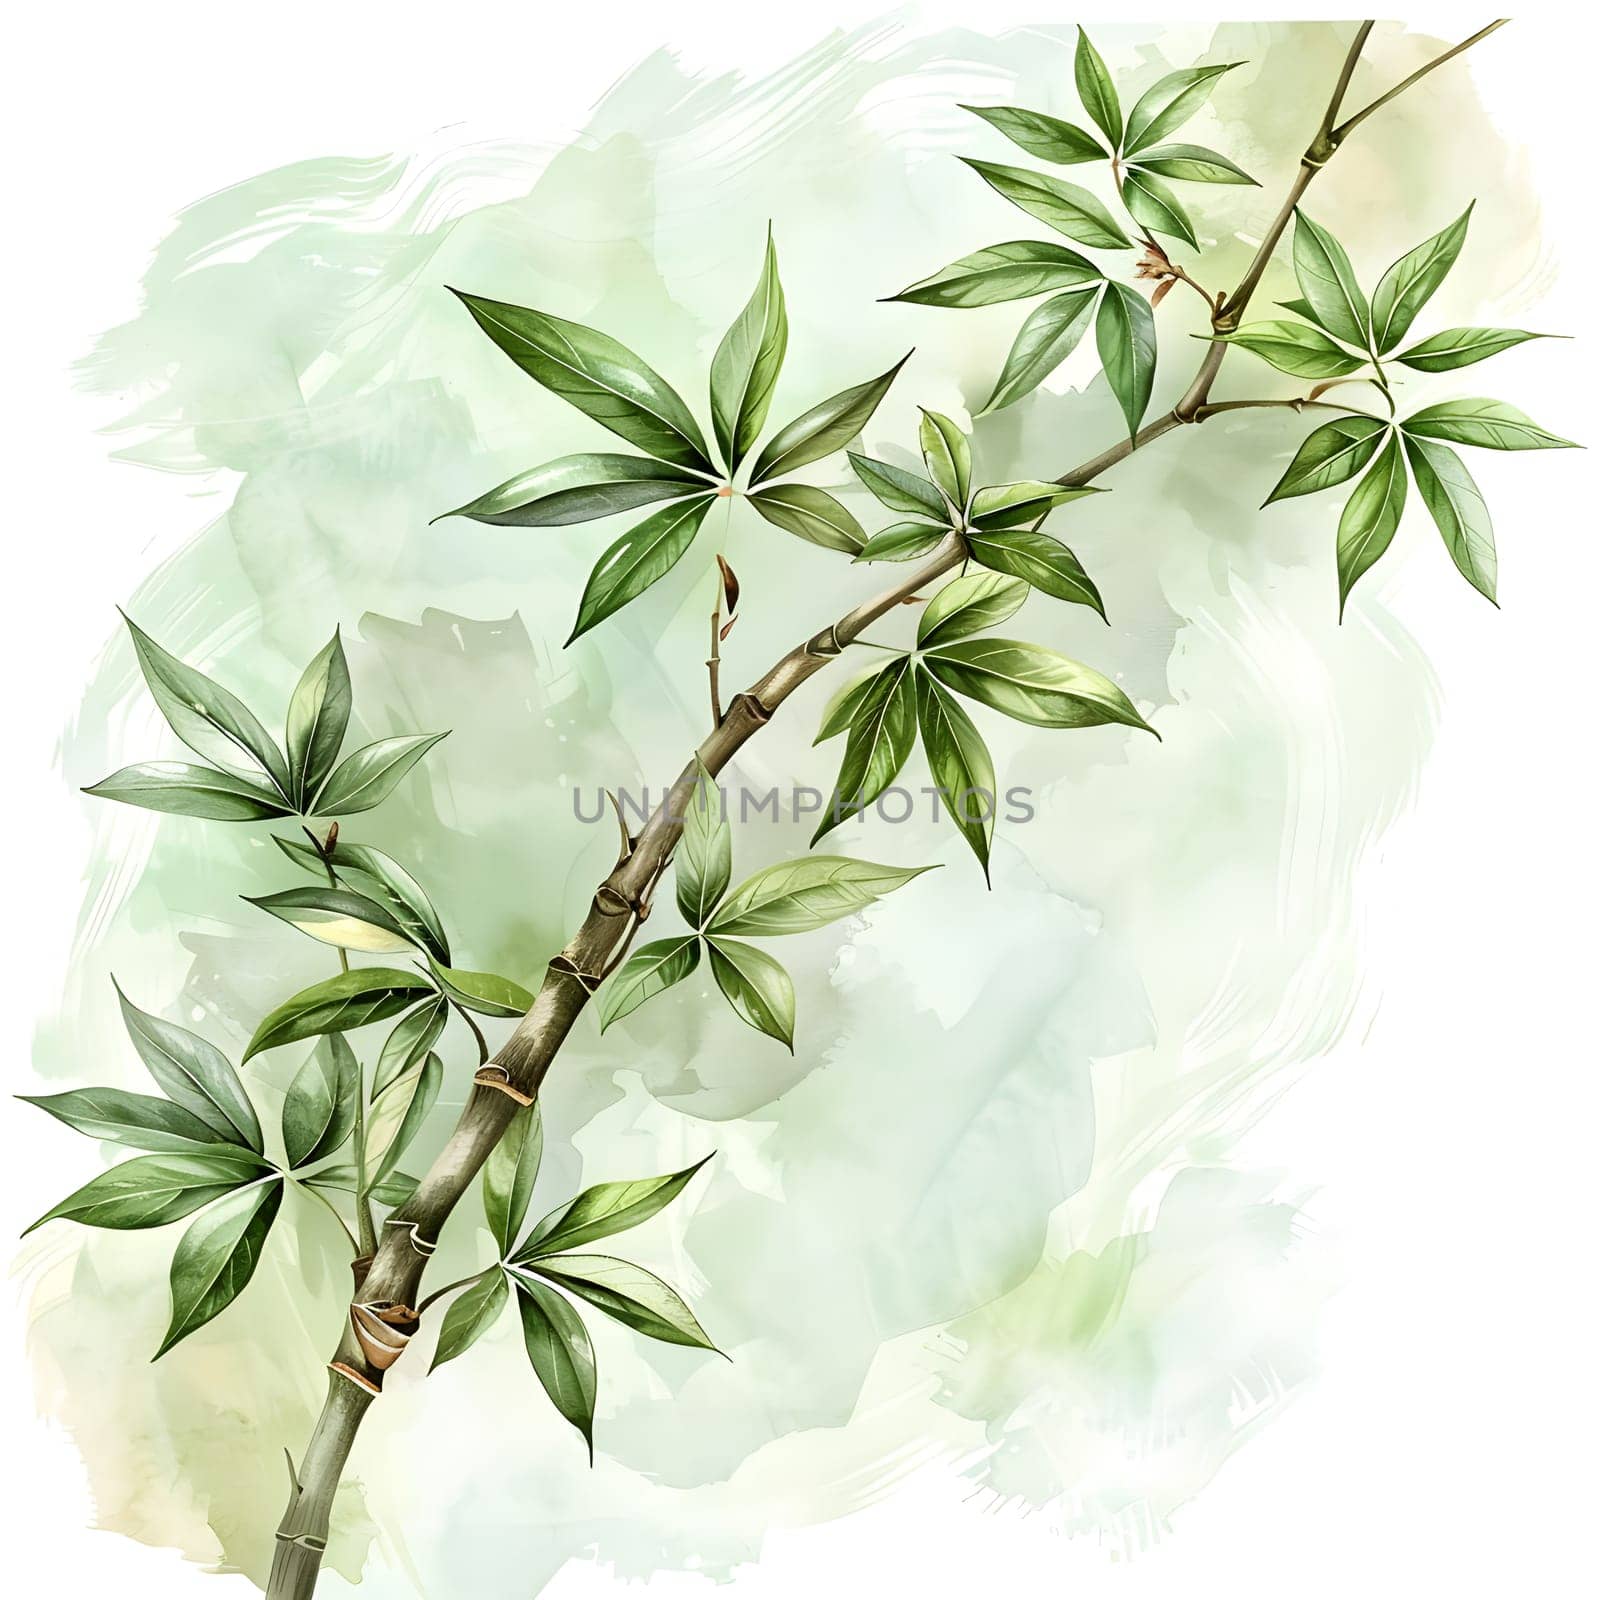 A watercolor painting depicting a bamboo branch with green leaves on a white background, showcasing the beauty of this terrestrial plant